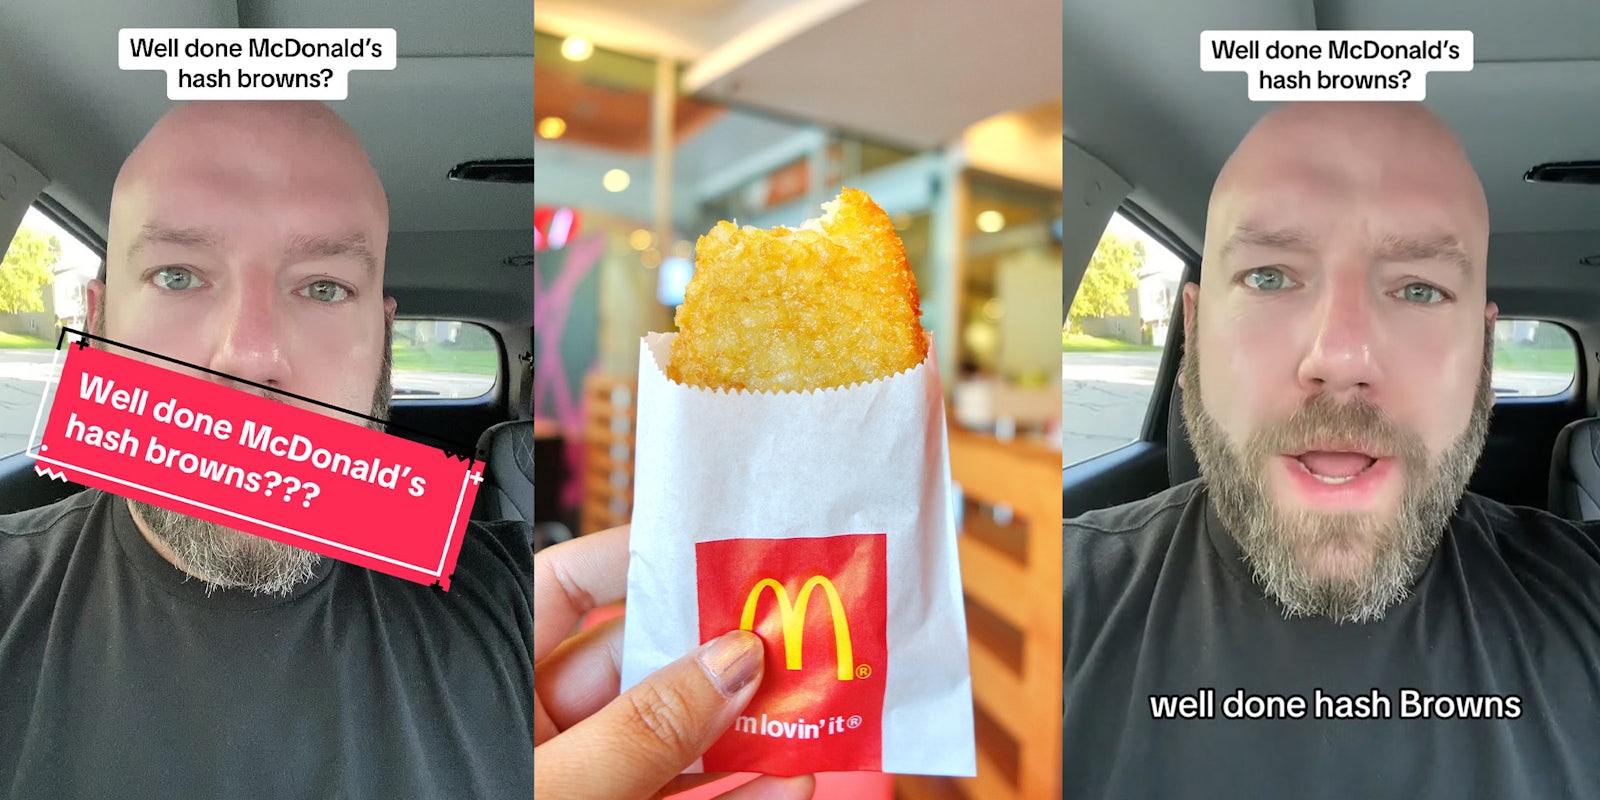 Former McDonald's corporate chef reveals why McDonald's doesn't serve 'well done' hash browns